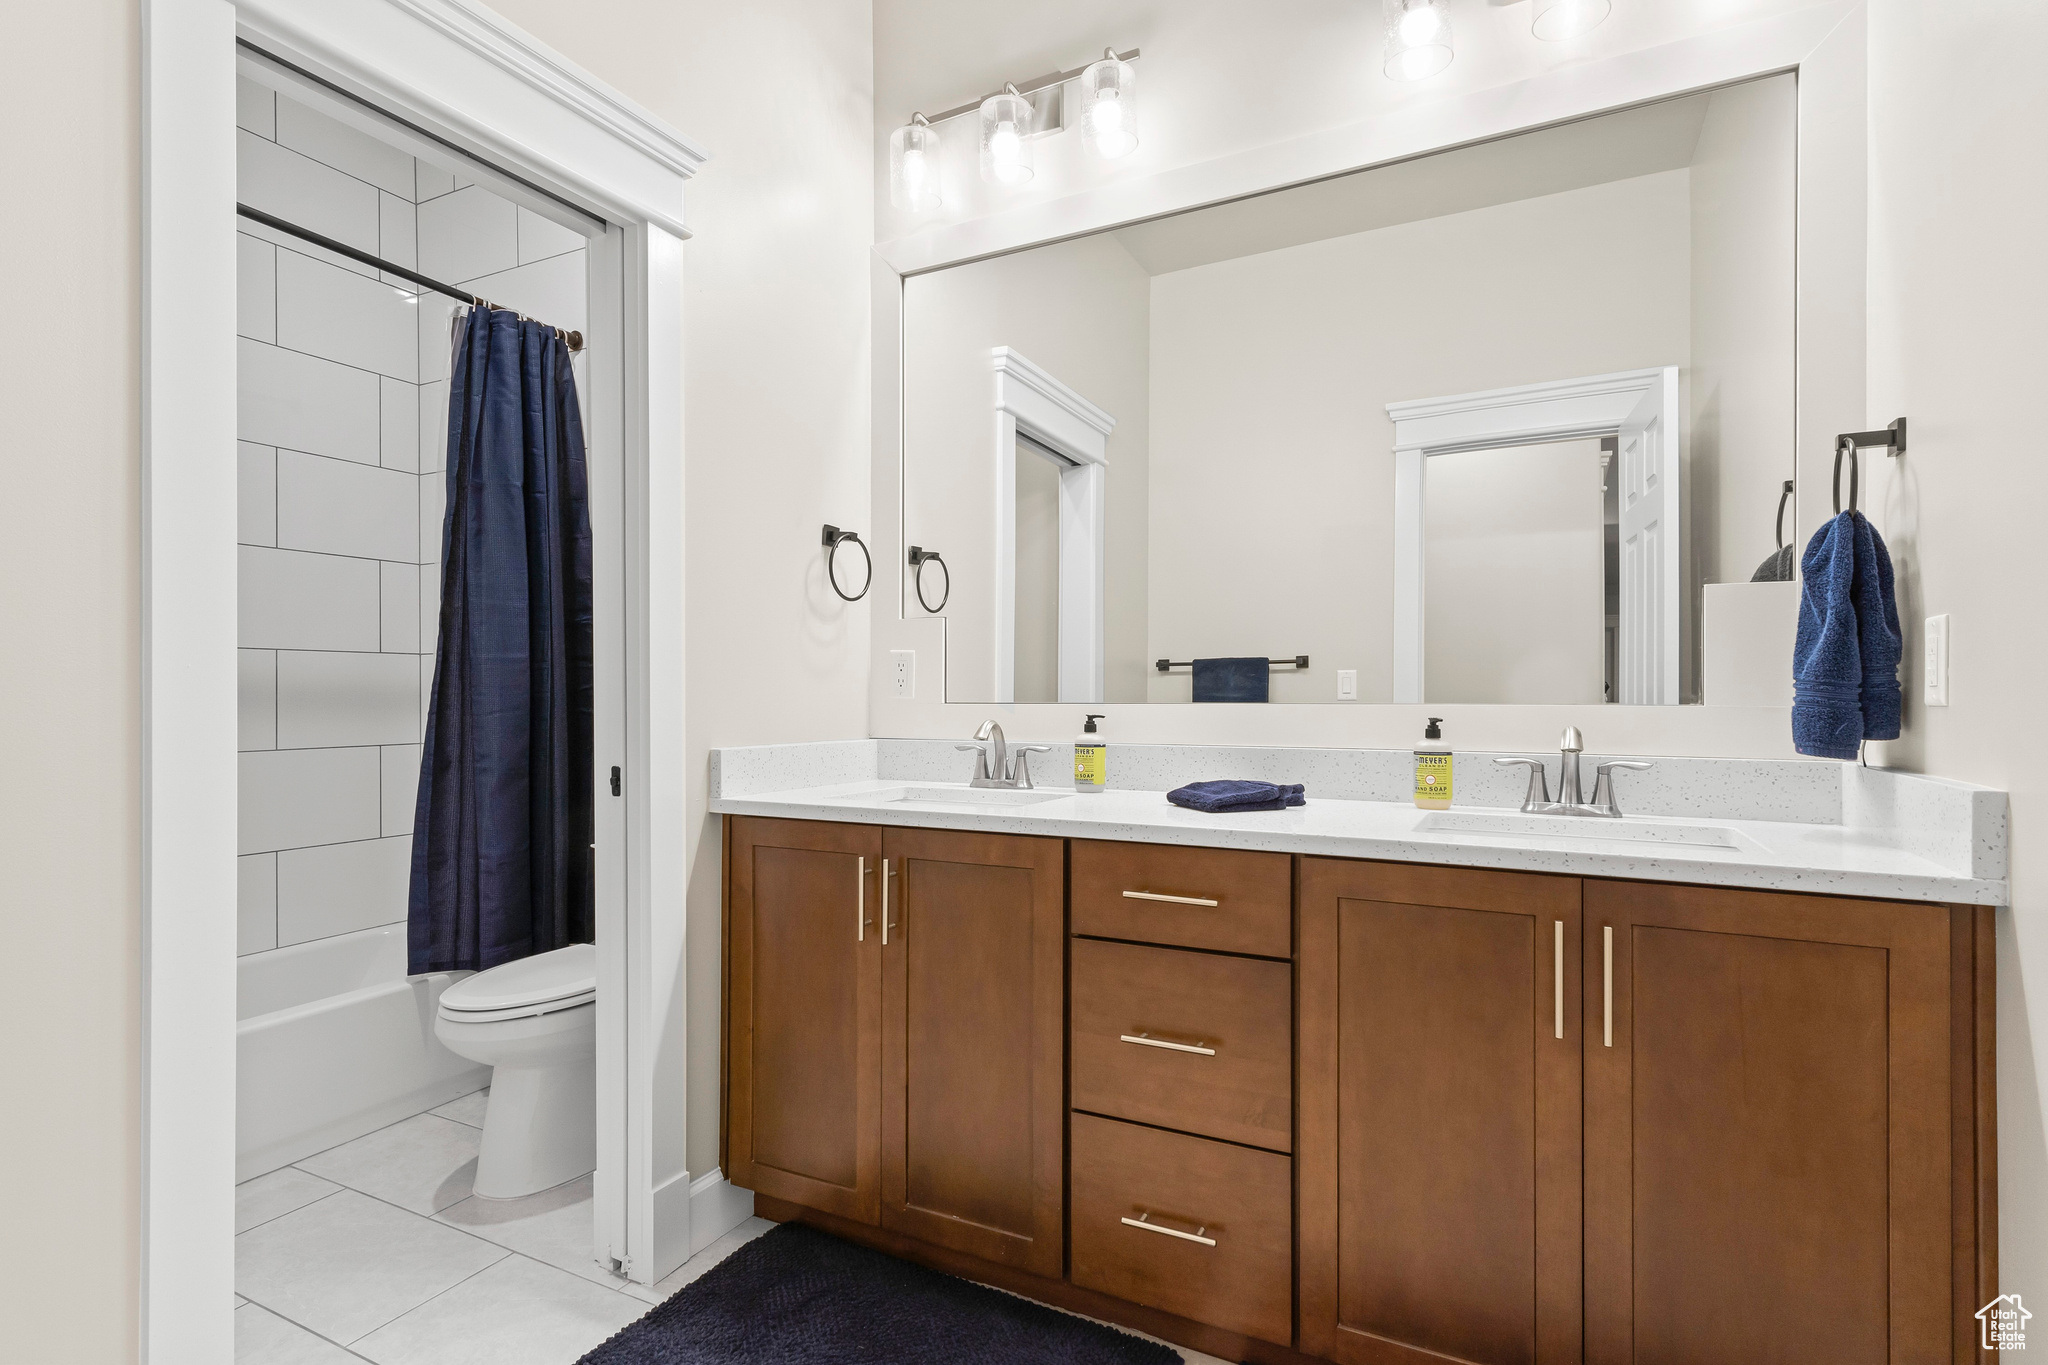 Full bathroom with double sink vanity, toilet, tile flooring, and shower / bathtub combination with curtain